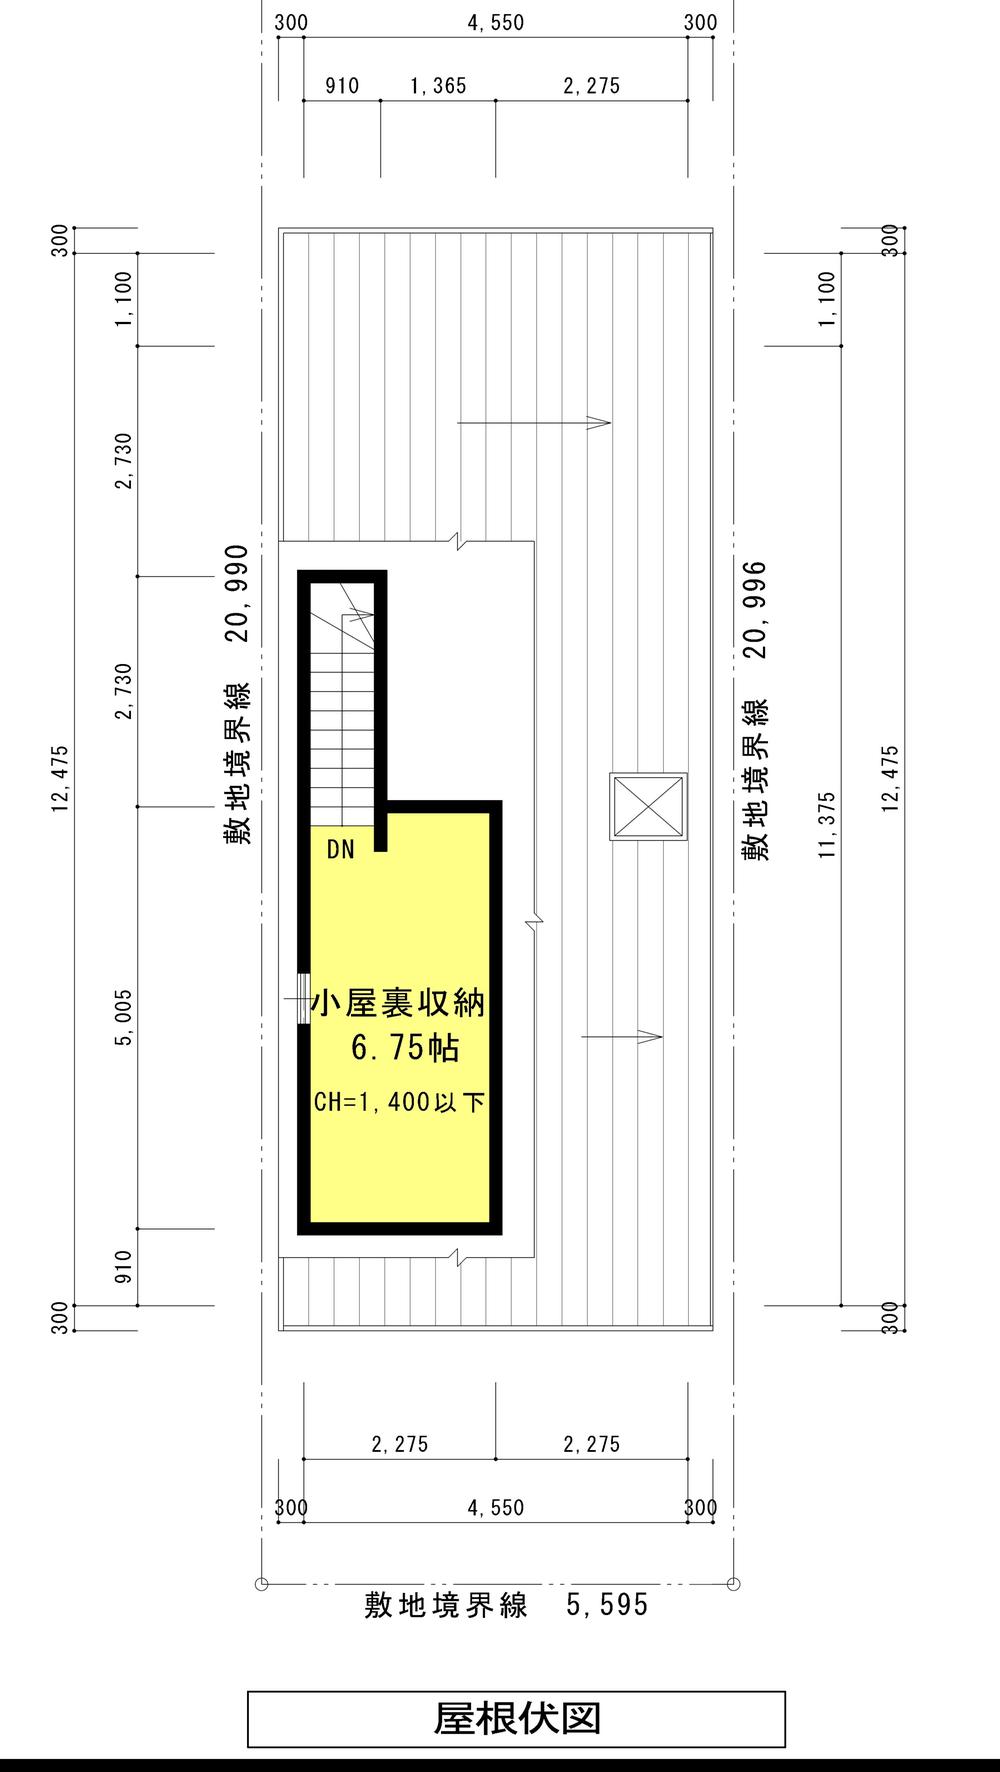 Floor plan. 24,800,000 yen, 4LDK, Land area 110.14 sq m , Building area 117.46 sq m   [Roof plan] Attic storage of leeway is with fixed stairs! 